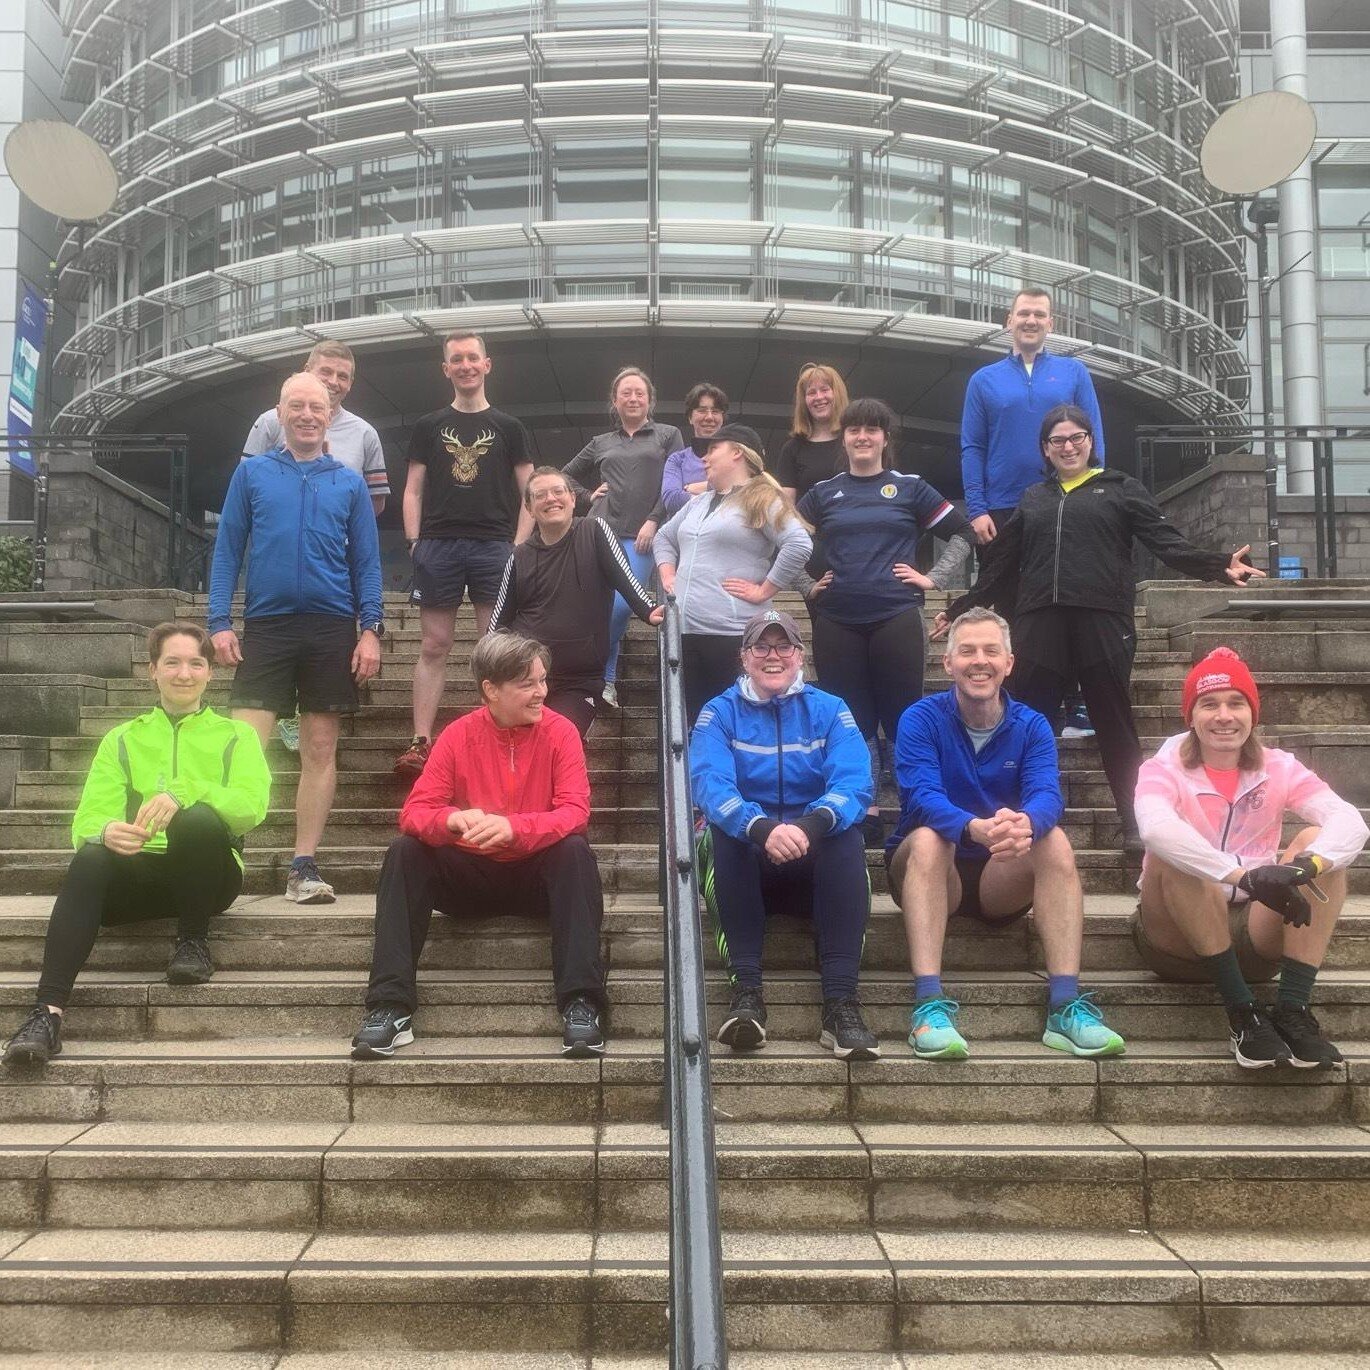 Huge well done to our 'Couch to 5K' group who have just completed week 5 of the programme, and can now run for 20 minutes without stopping! Excellent achievement. ⭐

Just a few more weeks to go, the finish line is in sight! 👏